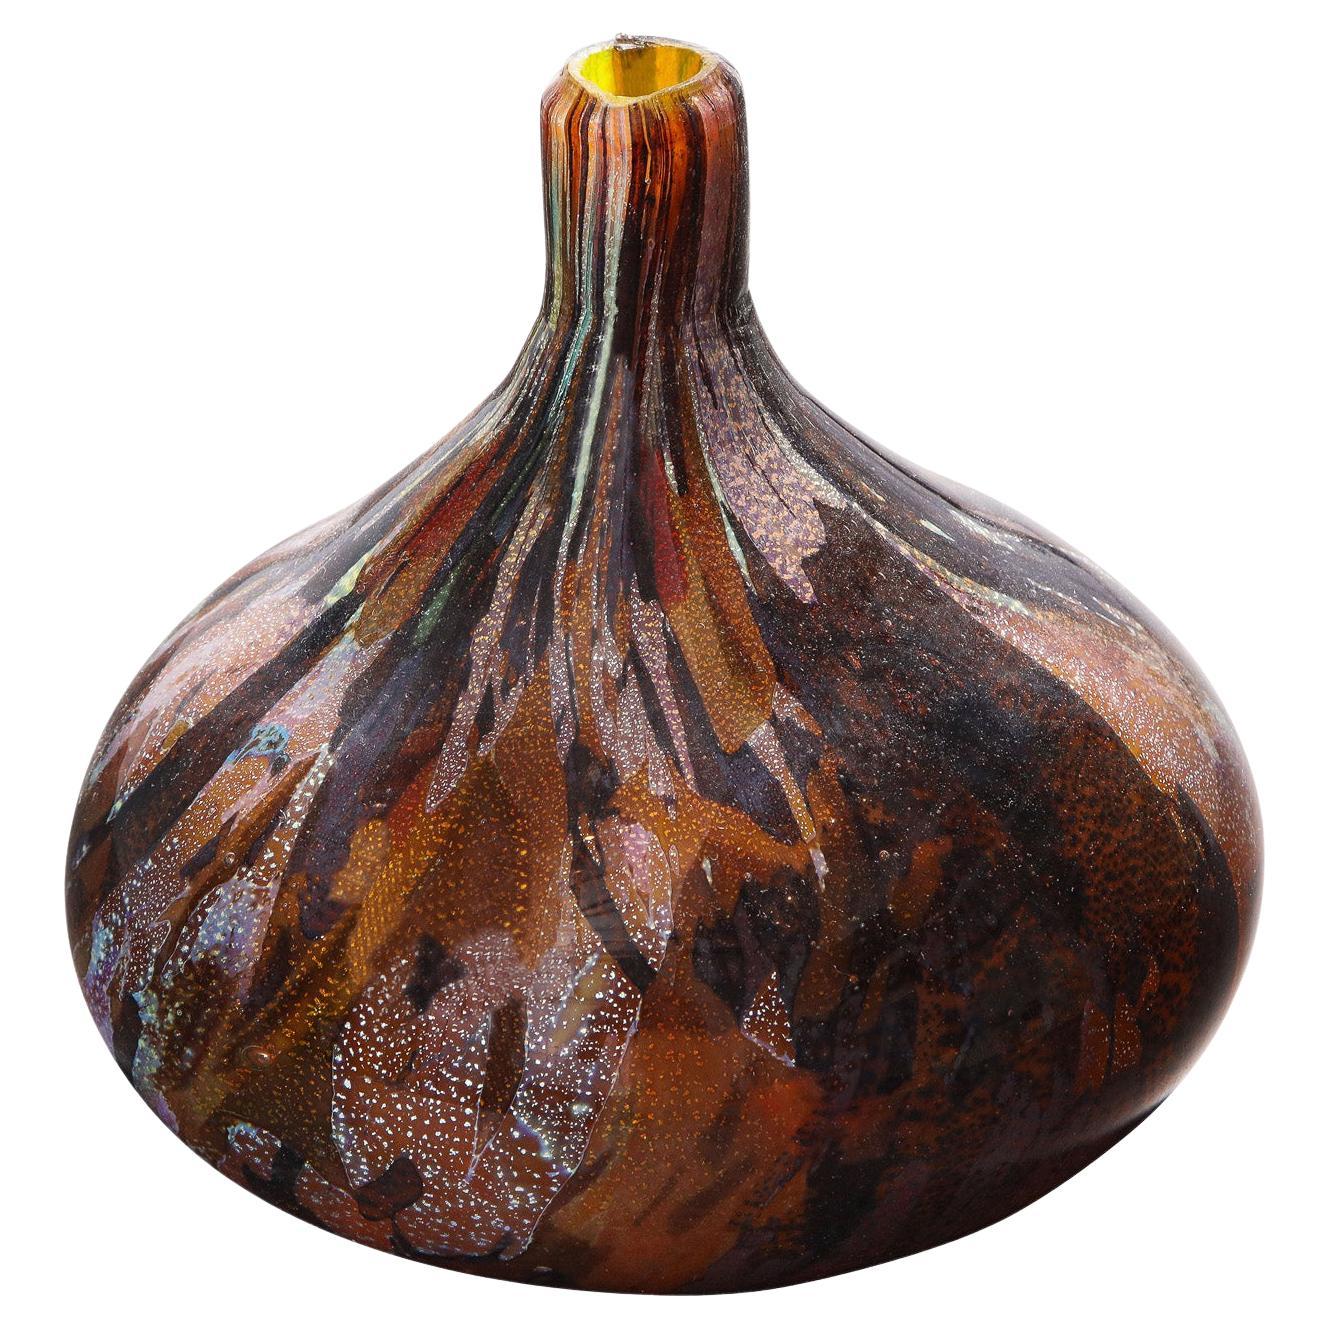 Also Nason Handblown Glass Vase with Silver and Gold Foil, 1960s For Sale